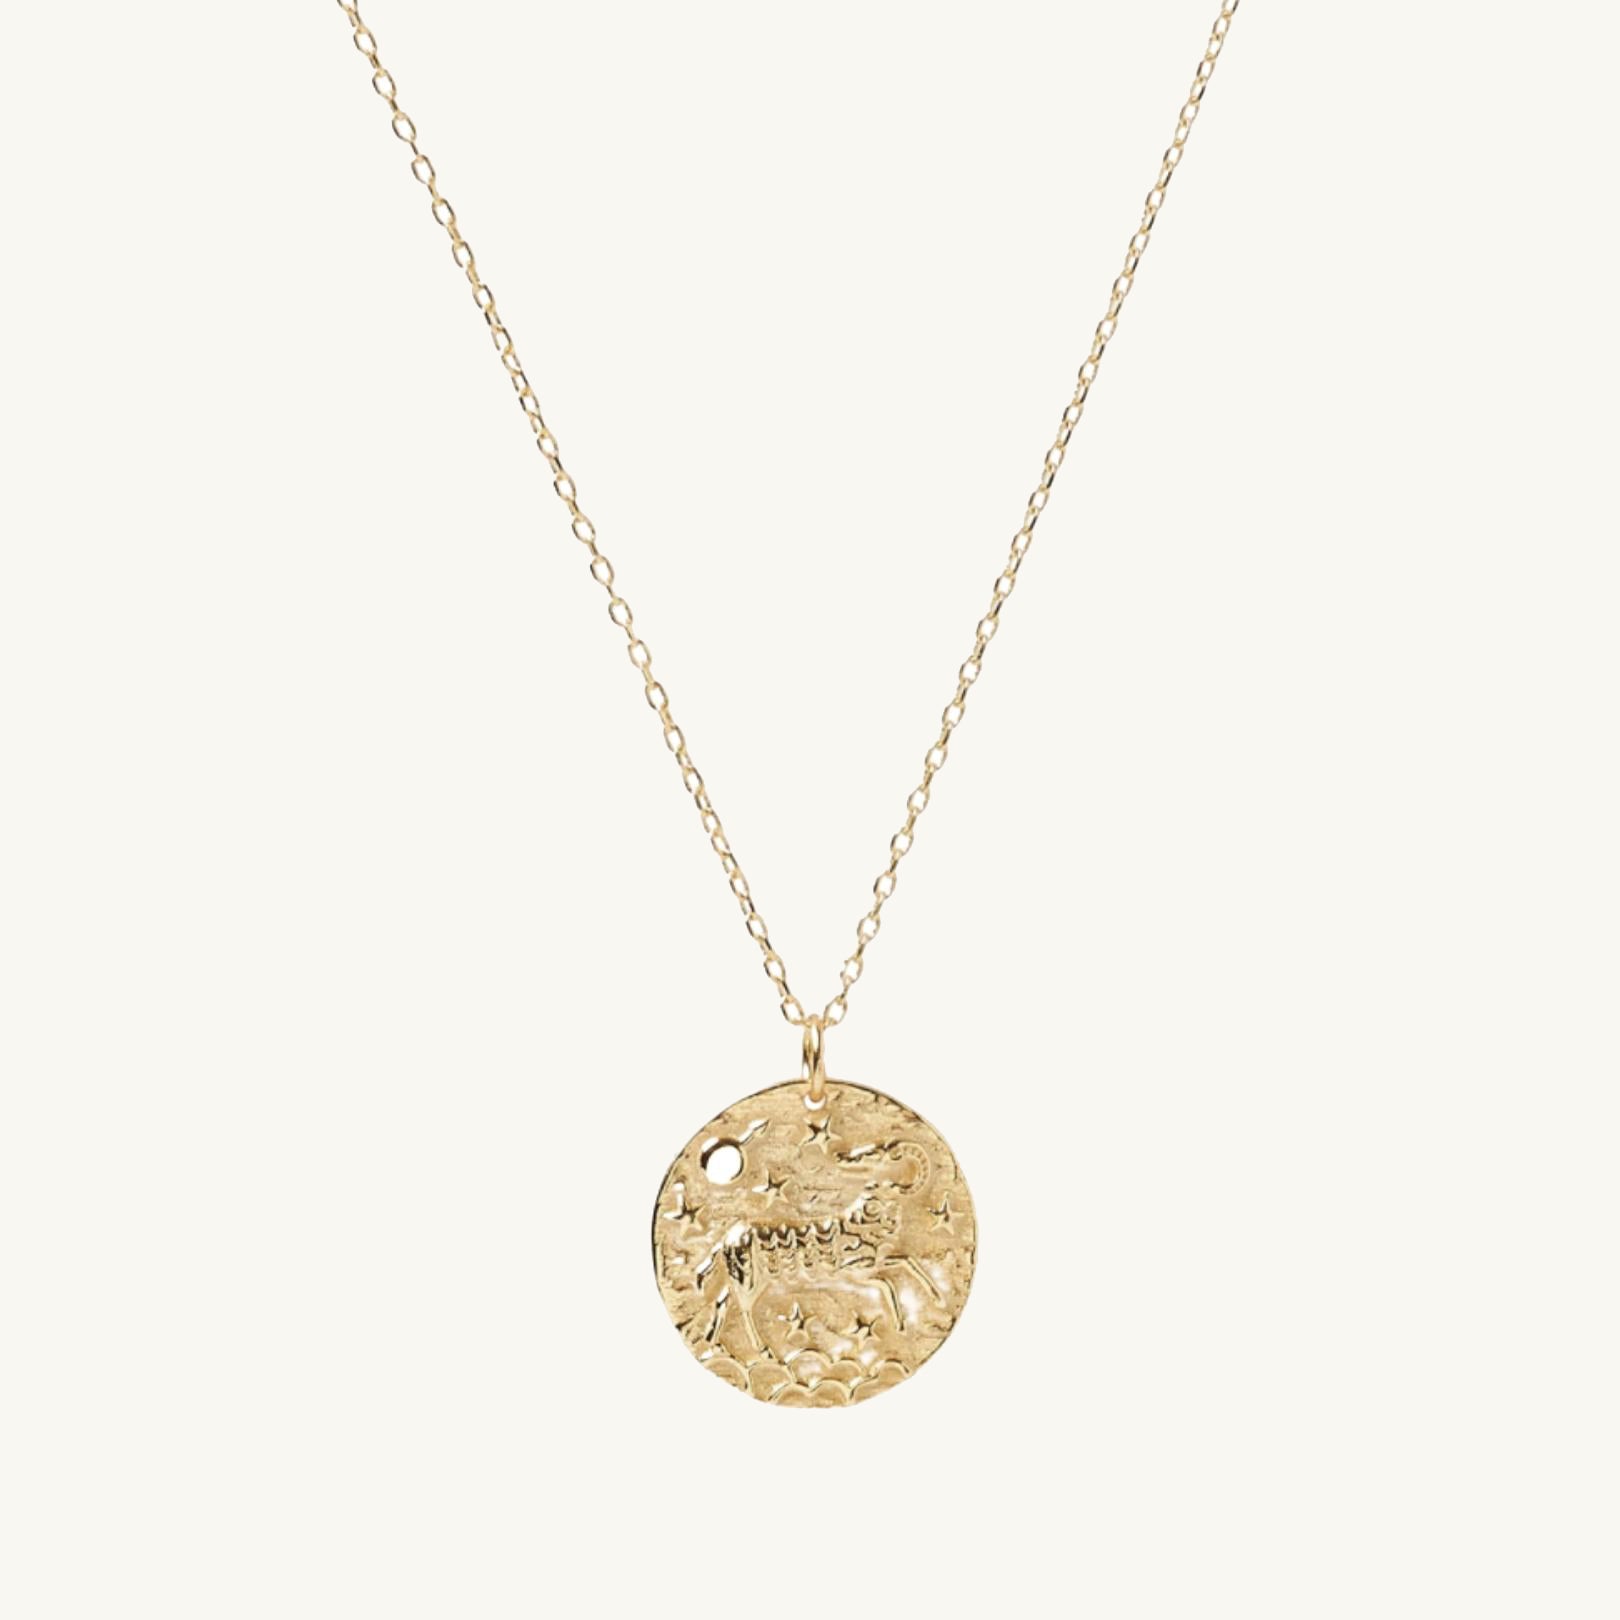 Aries - Star Sign Necklace